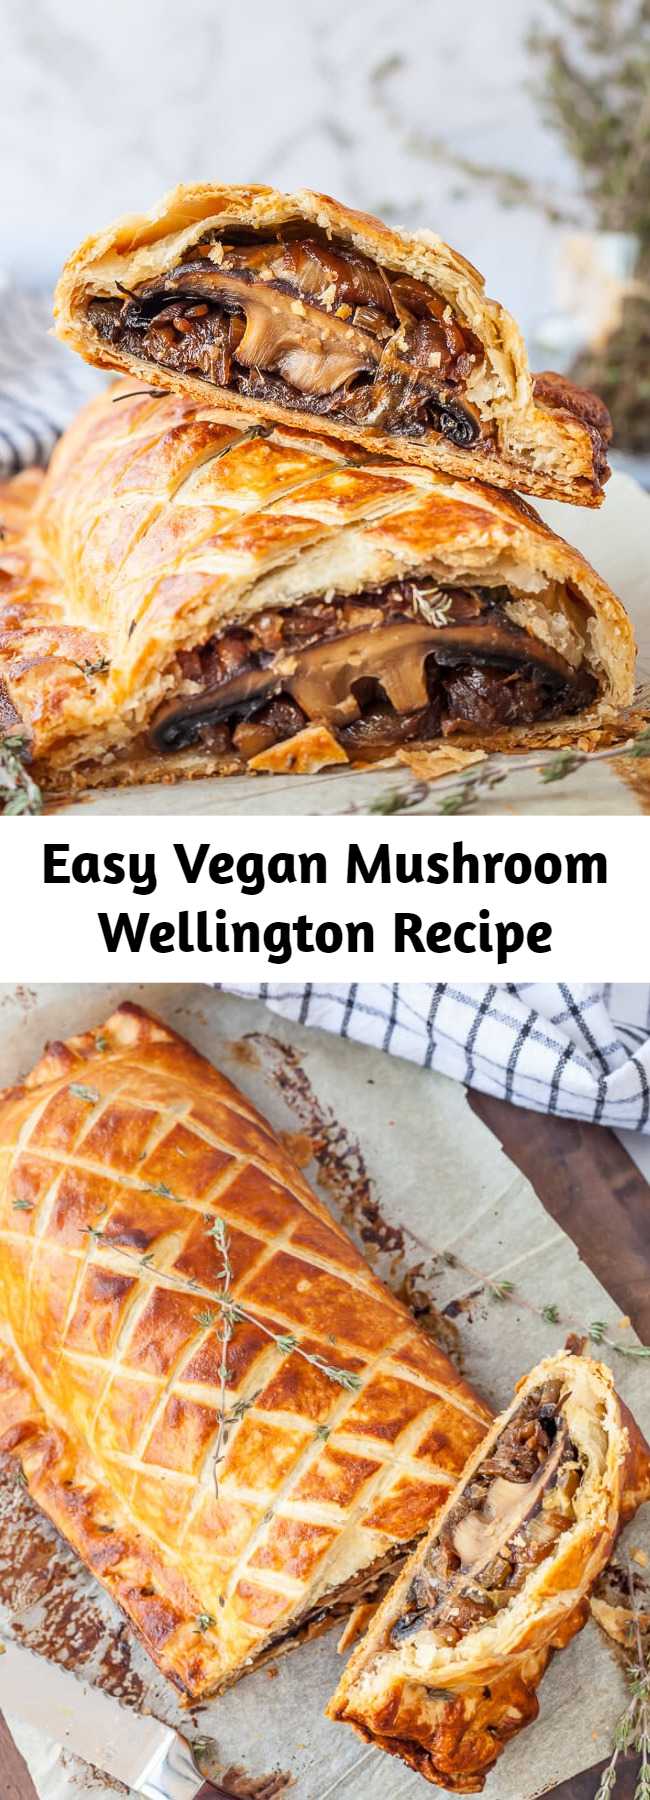 Easy Vegan Mushroom Wellington Recipe - A fantastic vegan version of the classic beef wellington. Tender mushrooms wrapped up in a flaky vegan puff pastry. This recipe is a perfect for a vegan Christmas or Thanksgiving entree, or any time you need a dish that impresses.